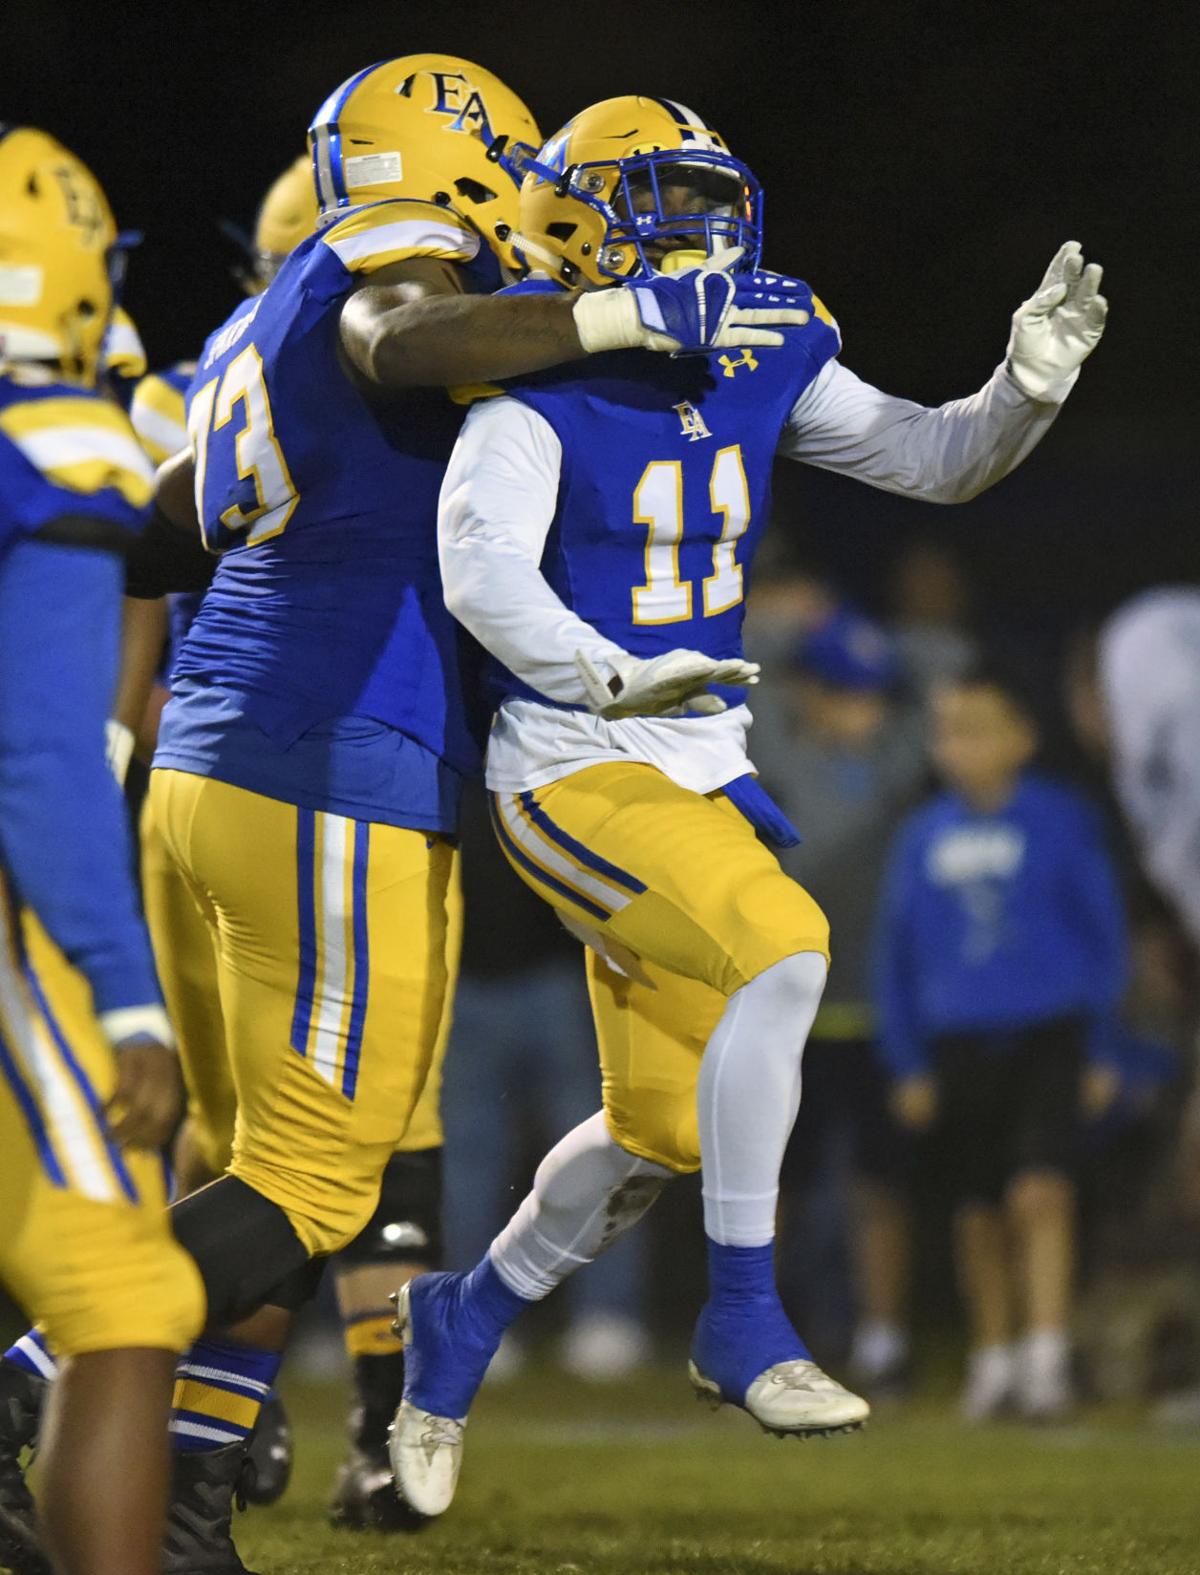 East Ascension wins parish bragging rights with victory over St. Amant